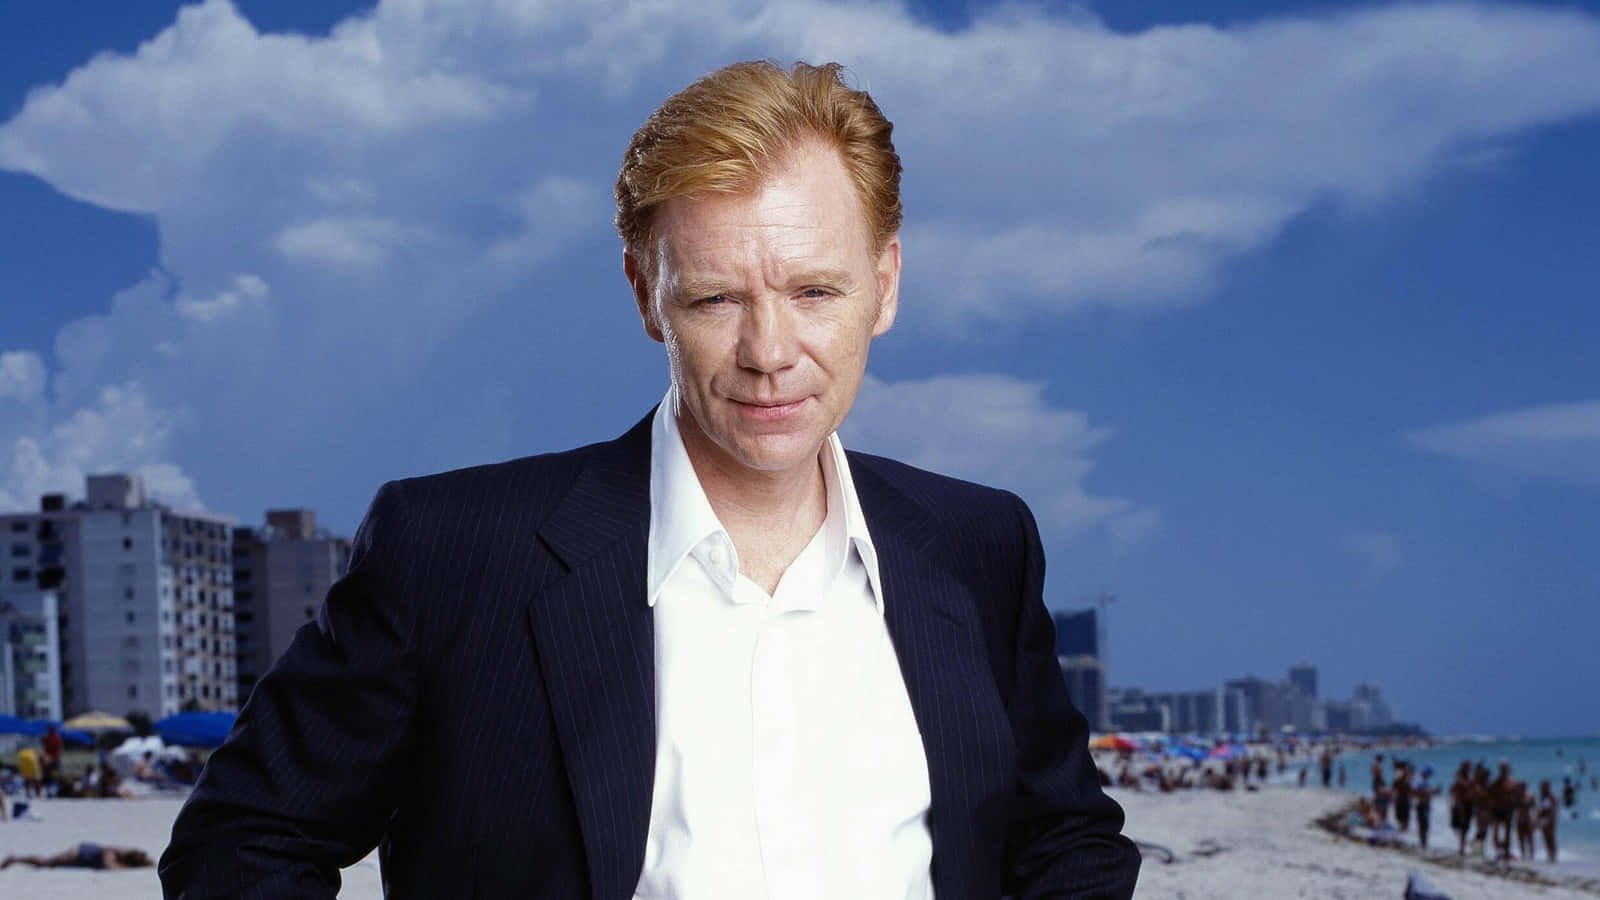 David Caruso striking a pose in a suit against a city backdrop Wallpaper